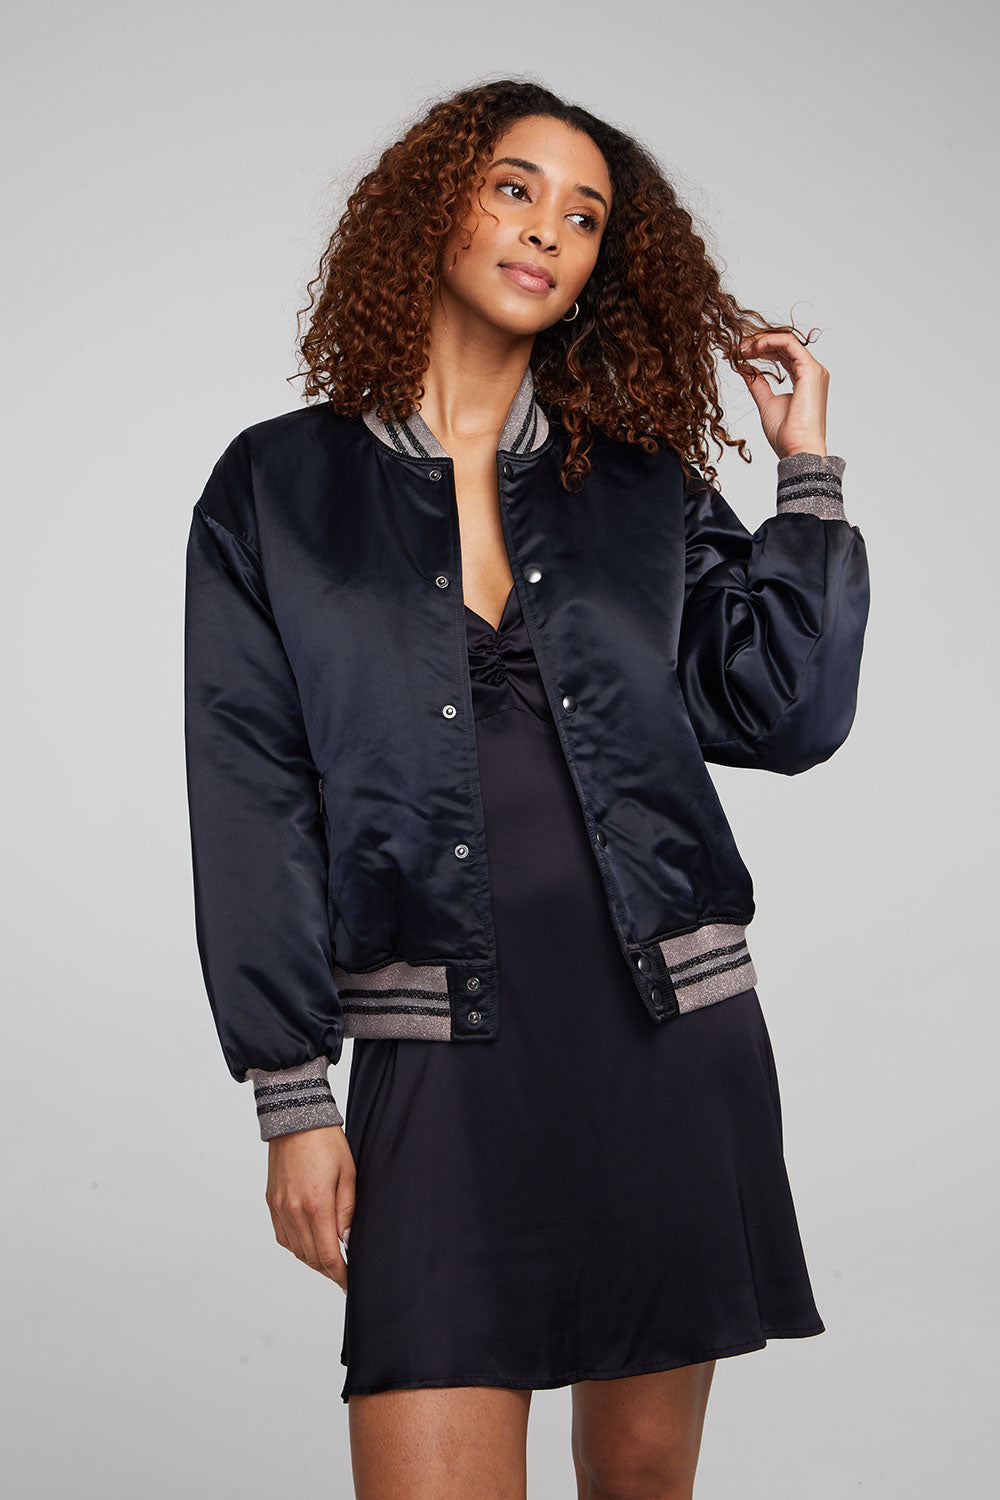 Boulevard Shadow Black Bomber WOMENS chaserbrand